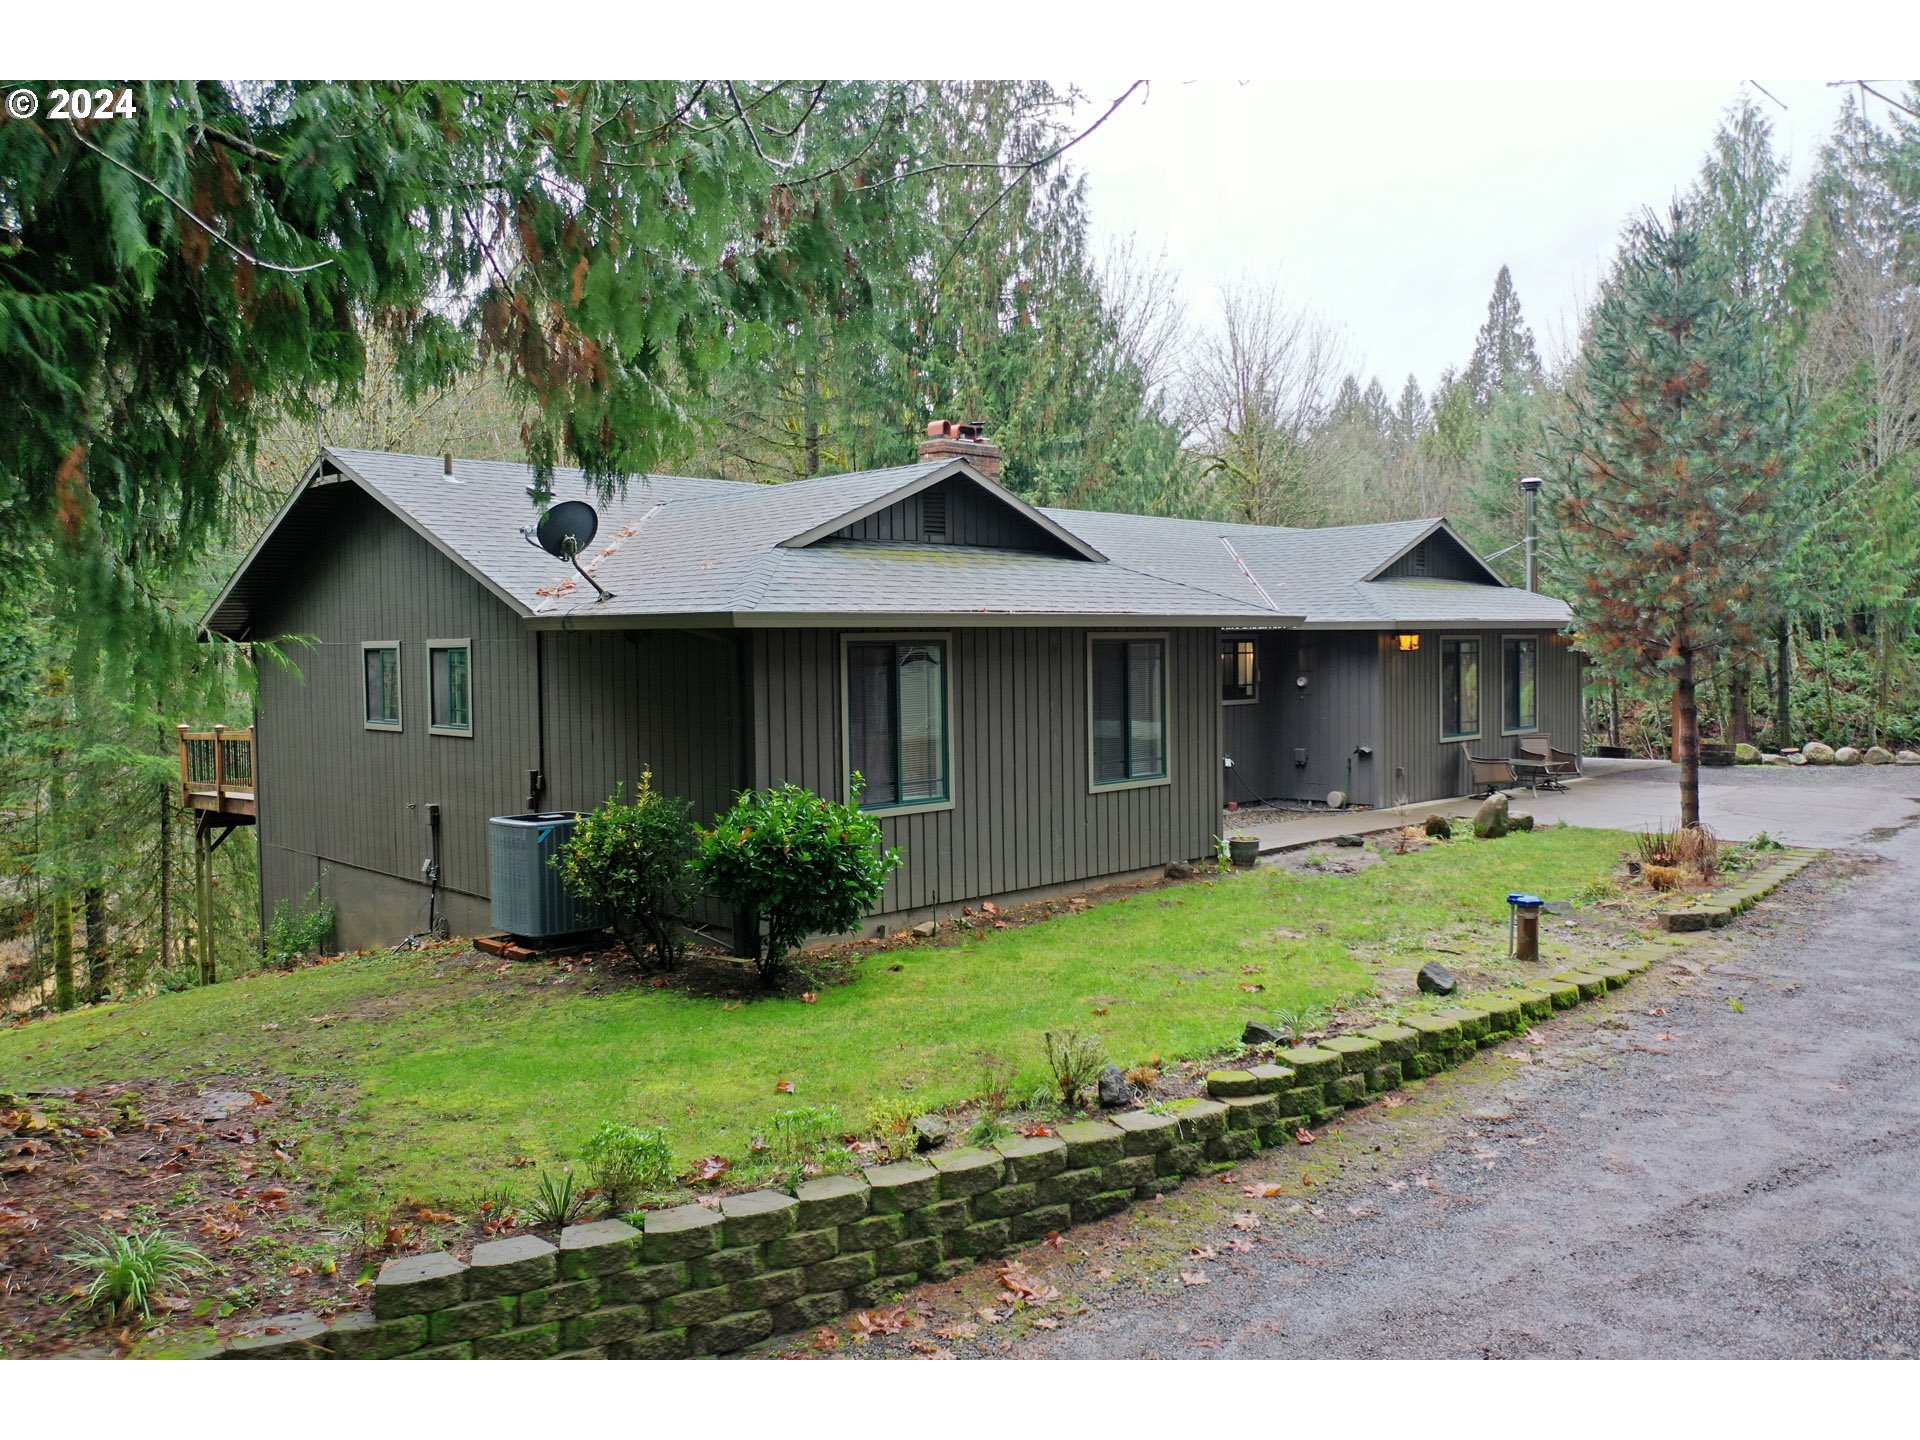 39207 NW HIDDEN ACRES LN, North Plains, OR 